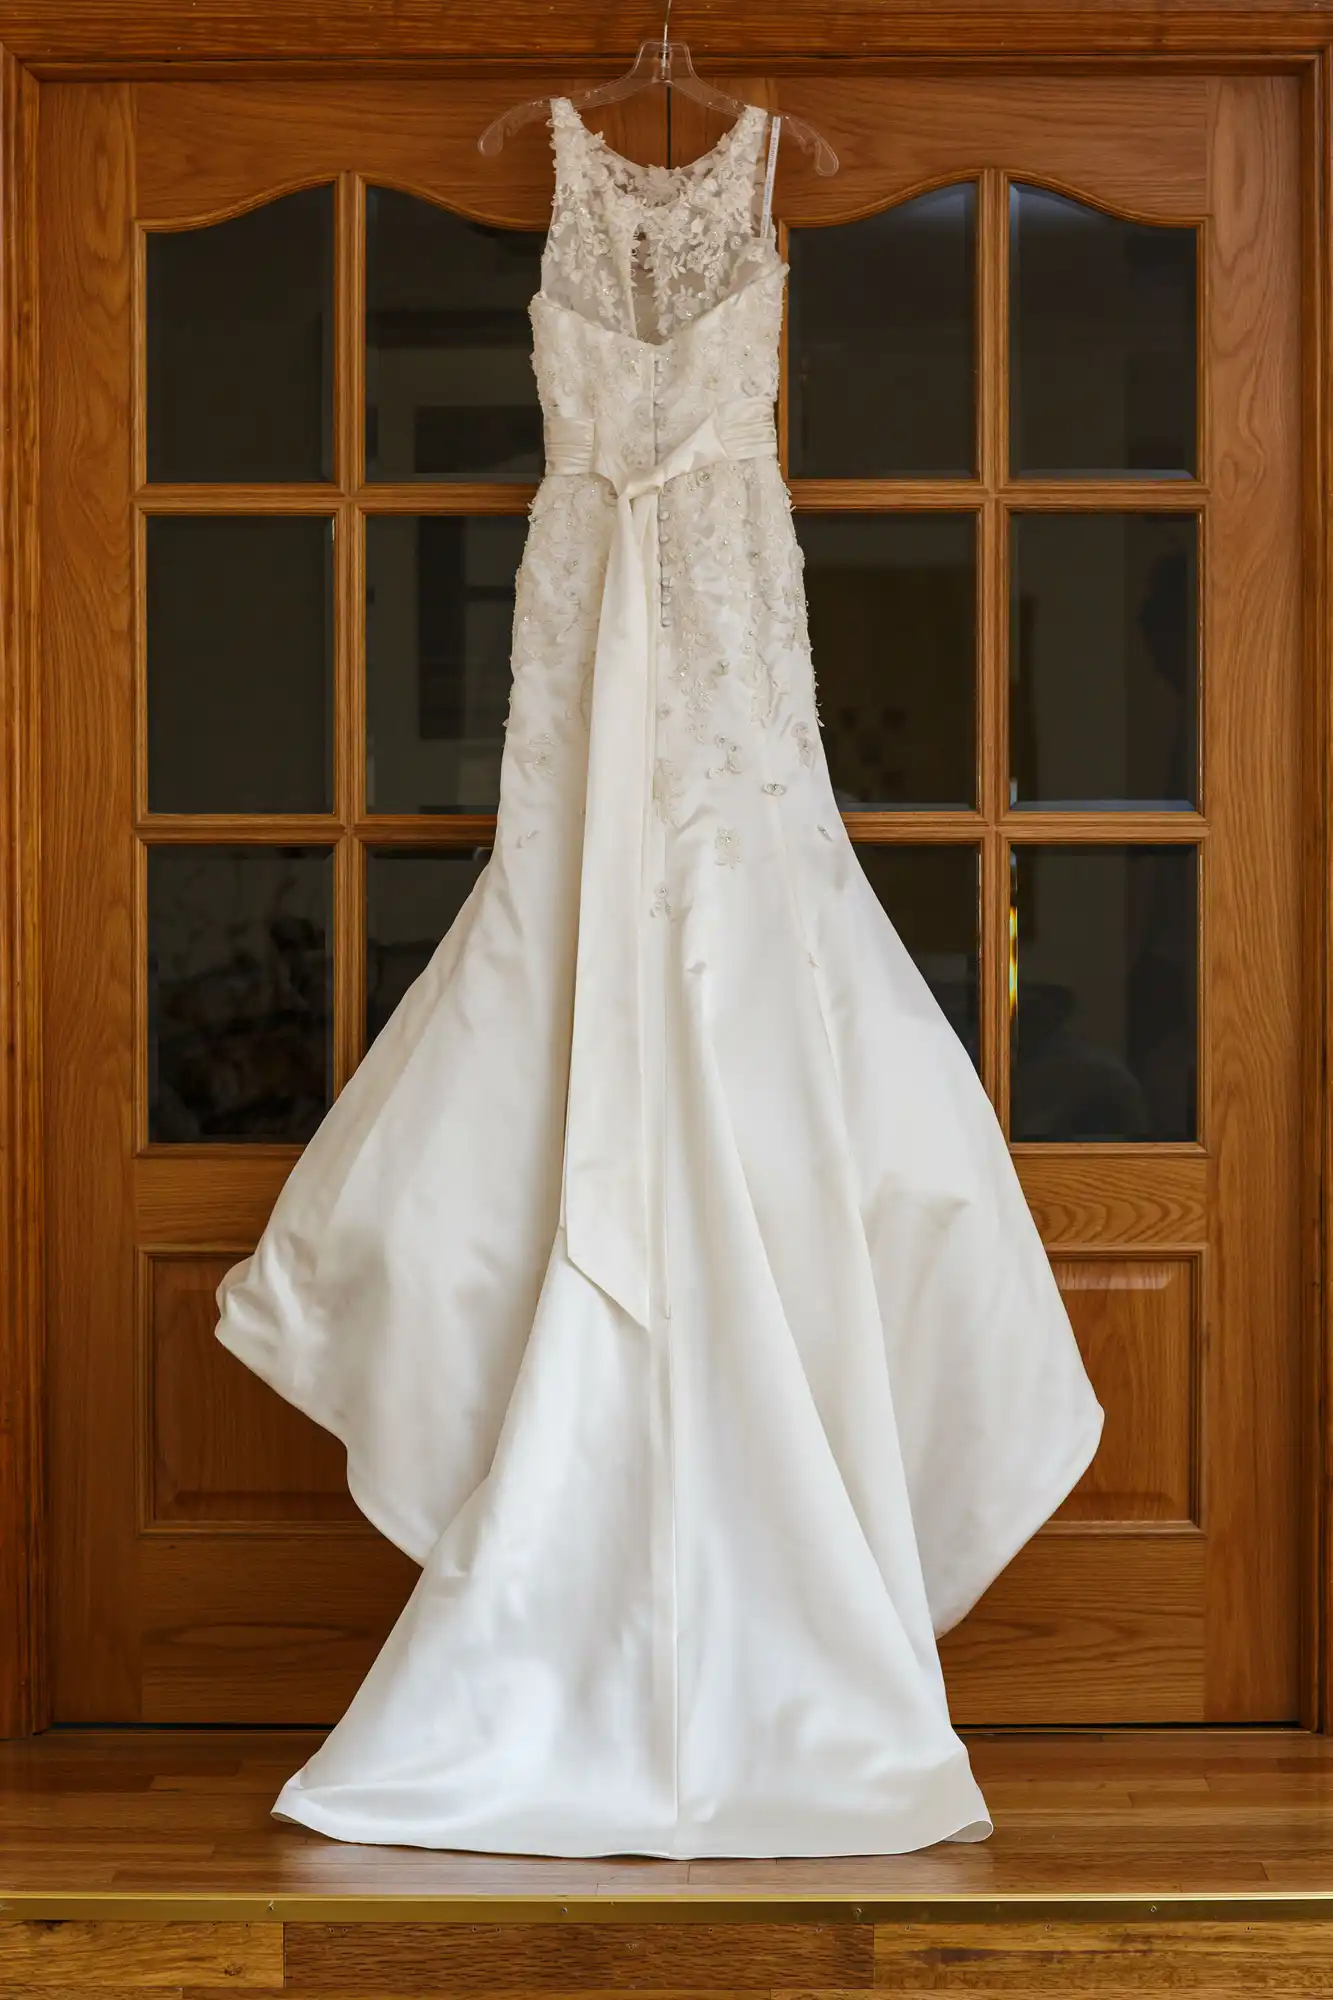 A white wedding dress with lace details hangs on a wooden door with glass panes.